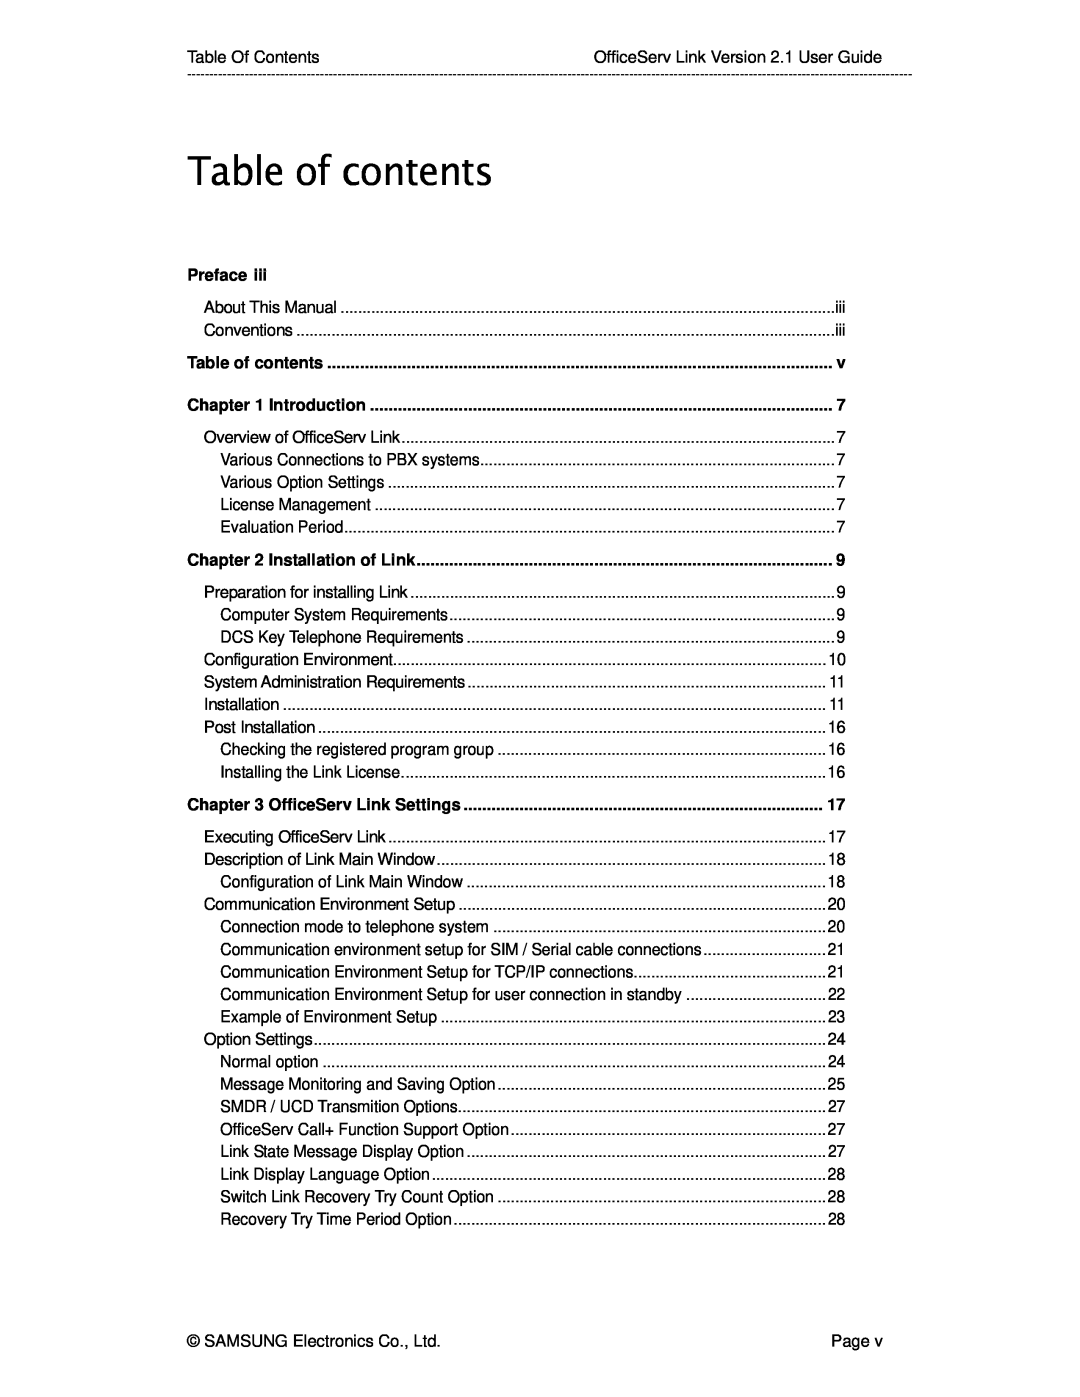 Samsung Version 2.1 manual Table of contents, Preface, Introduction, Installation of Link, OfficeServ Link Settings 